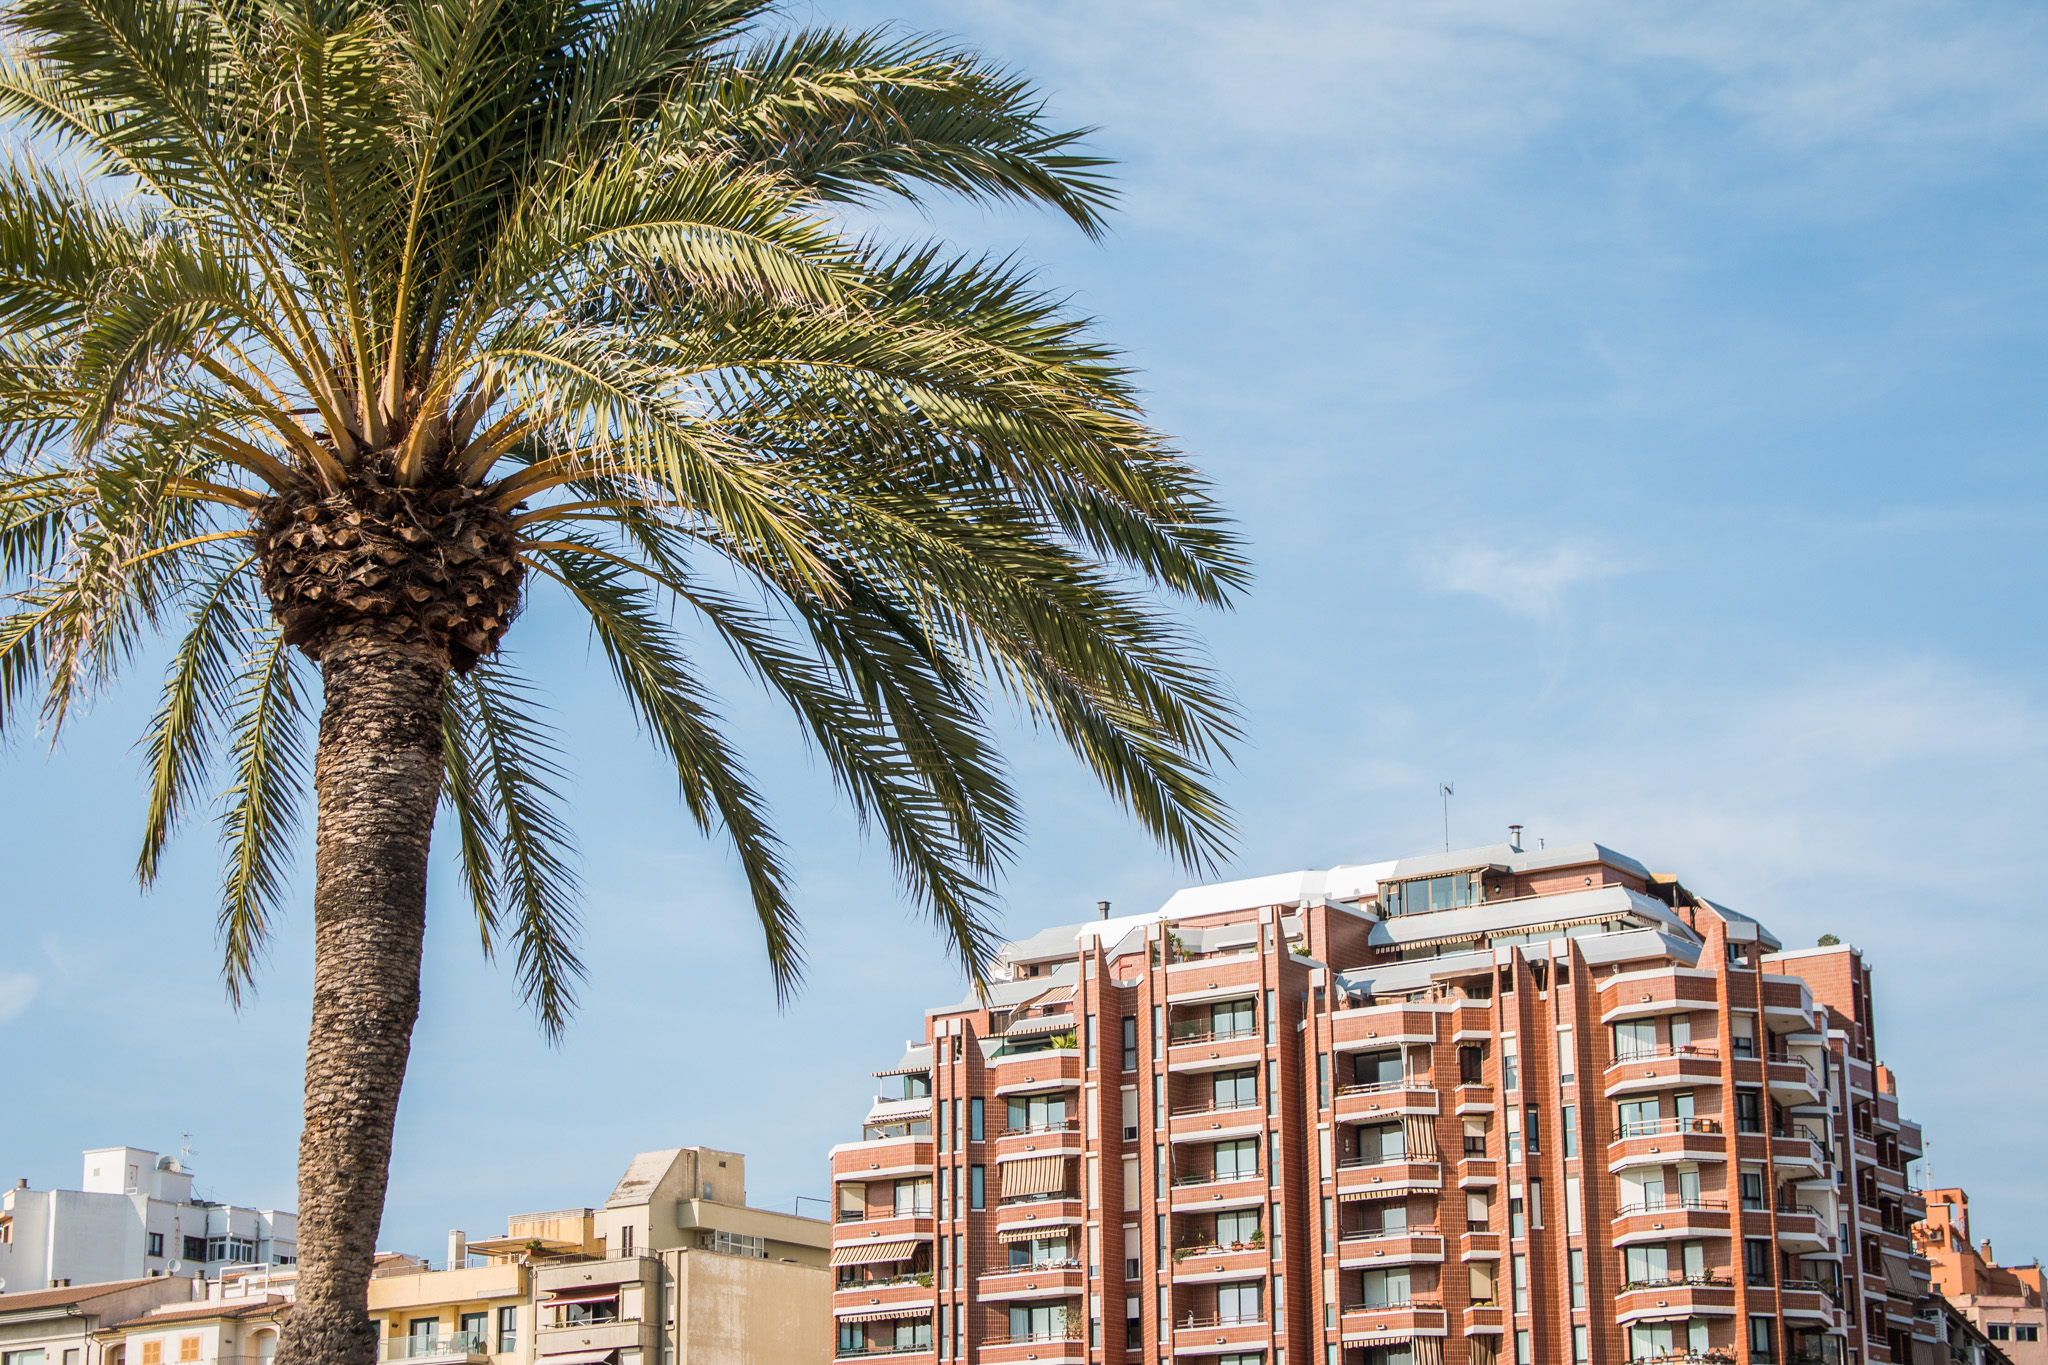 Sea and city, Palma is the perfect location to find a home near the beach